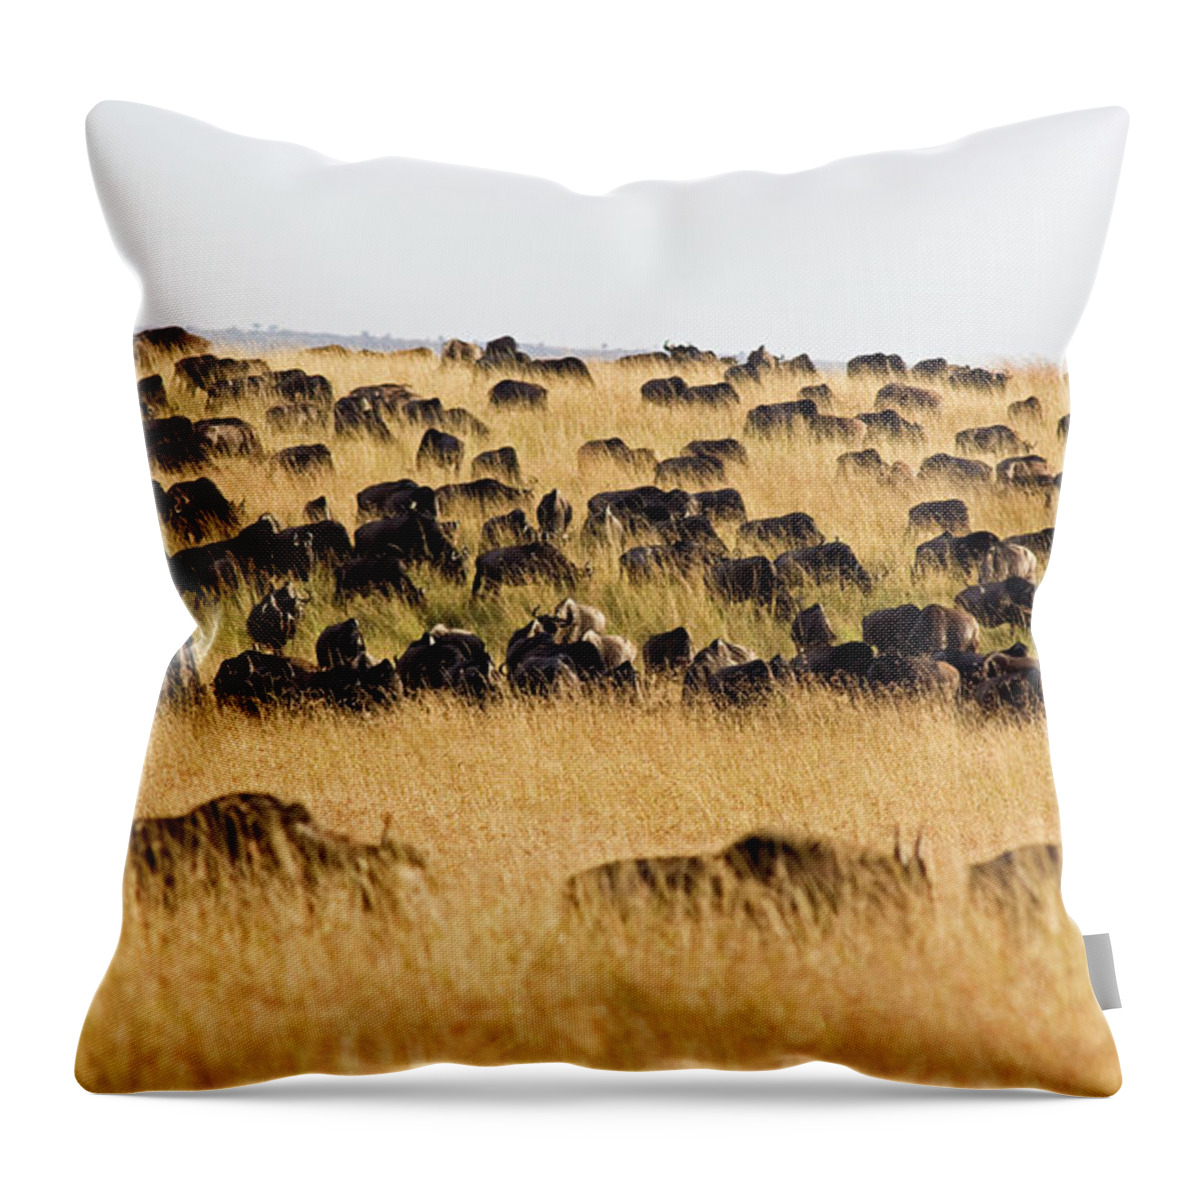 Following Throw Pillow featuring the photograph Wildebeest Migration by Wldavies